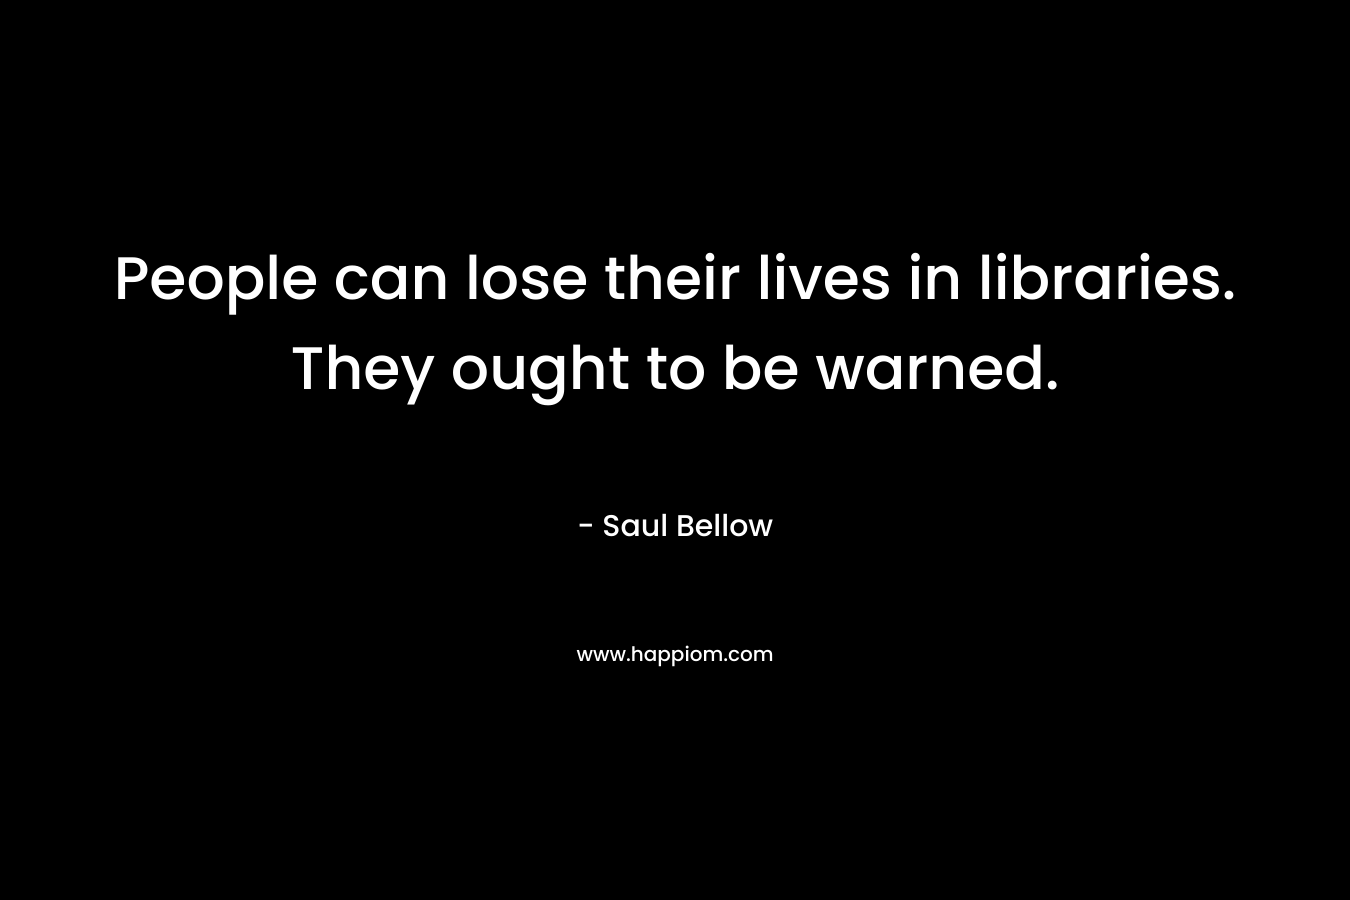 People can lose their lives in libraries. They ought to be warned.